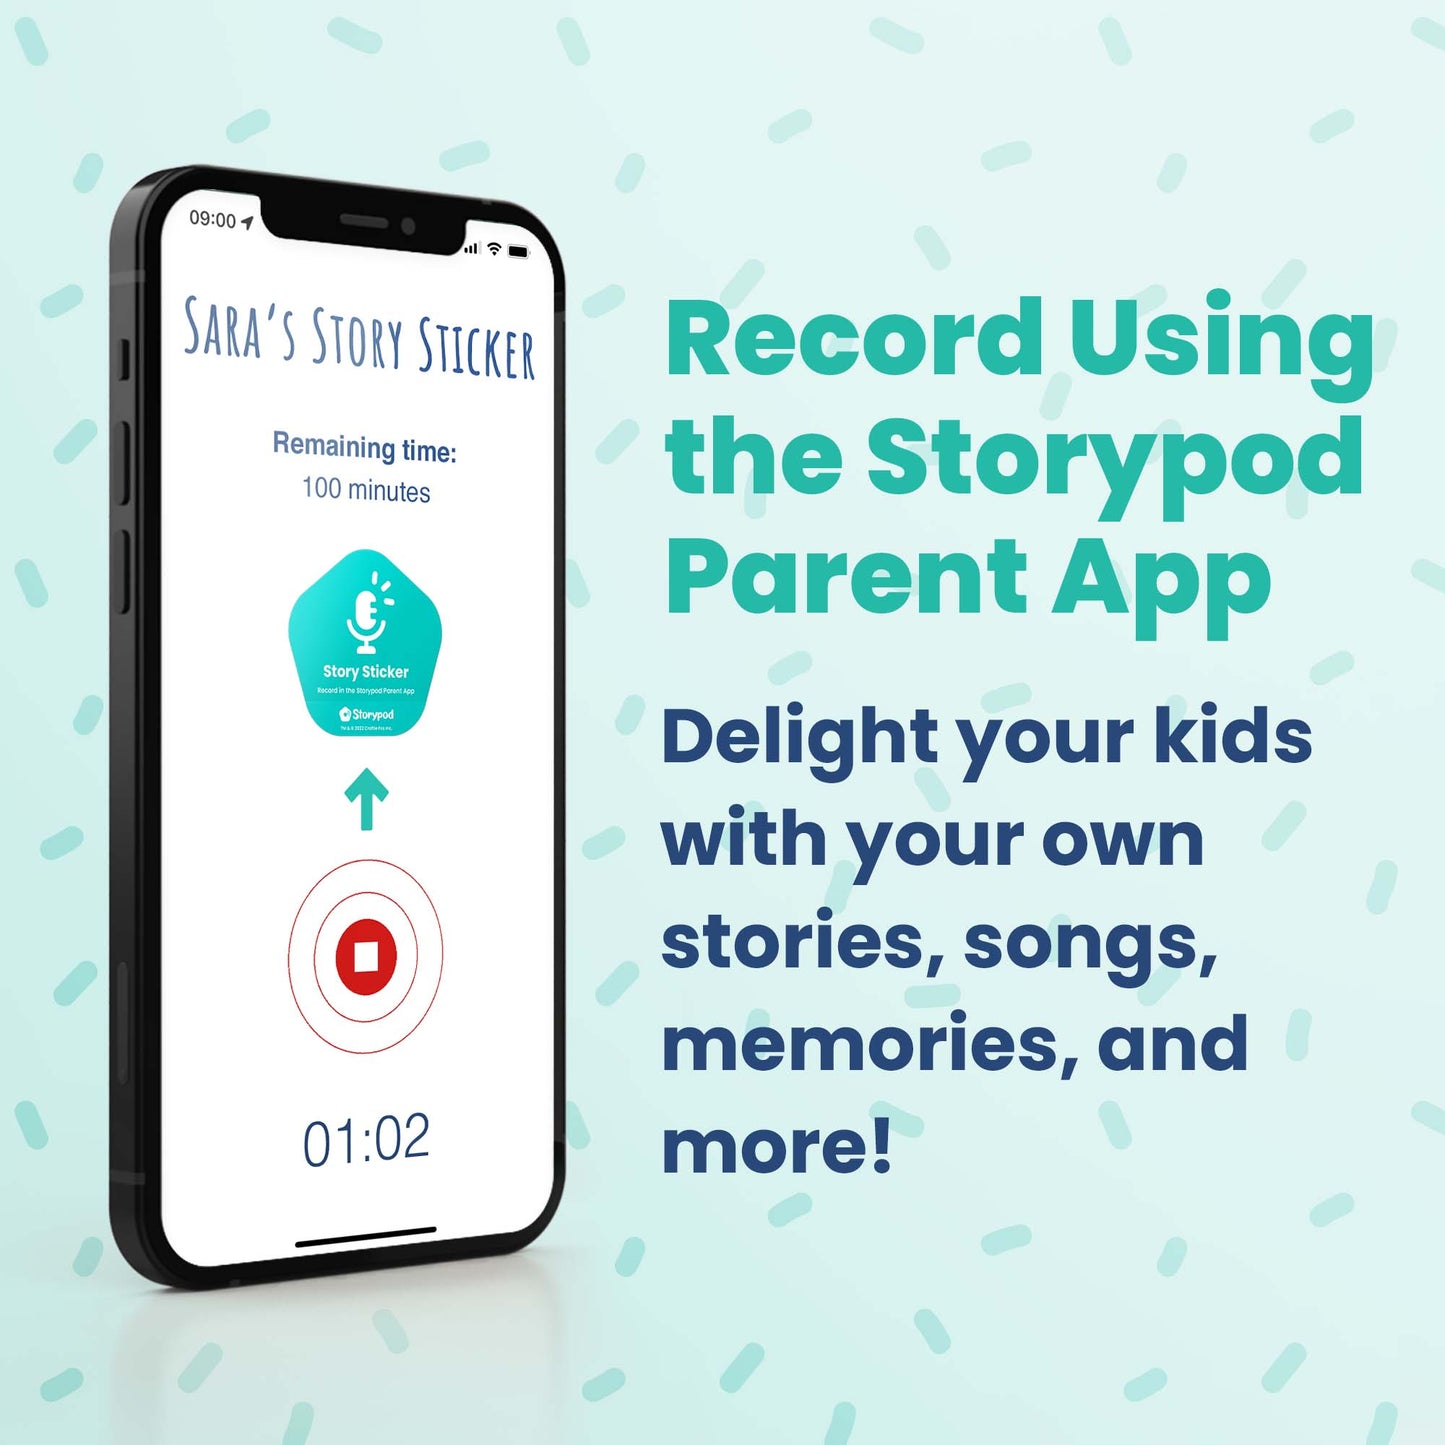 The Special Holiday Storypod Bundle